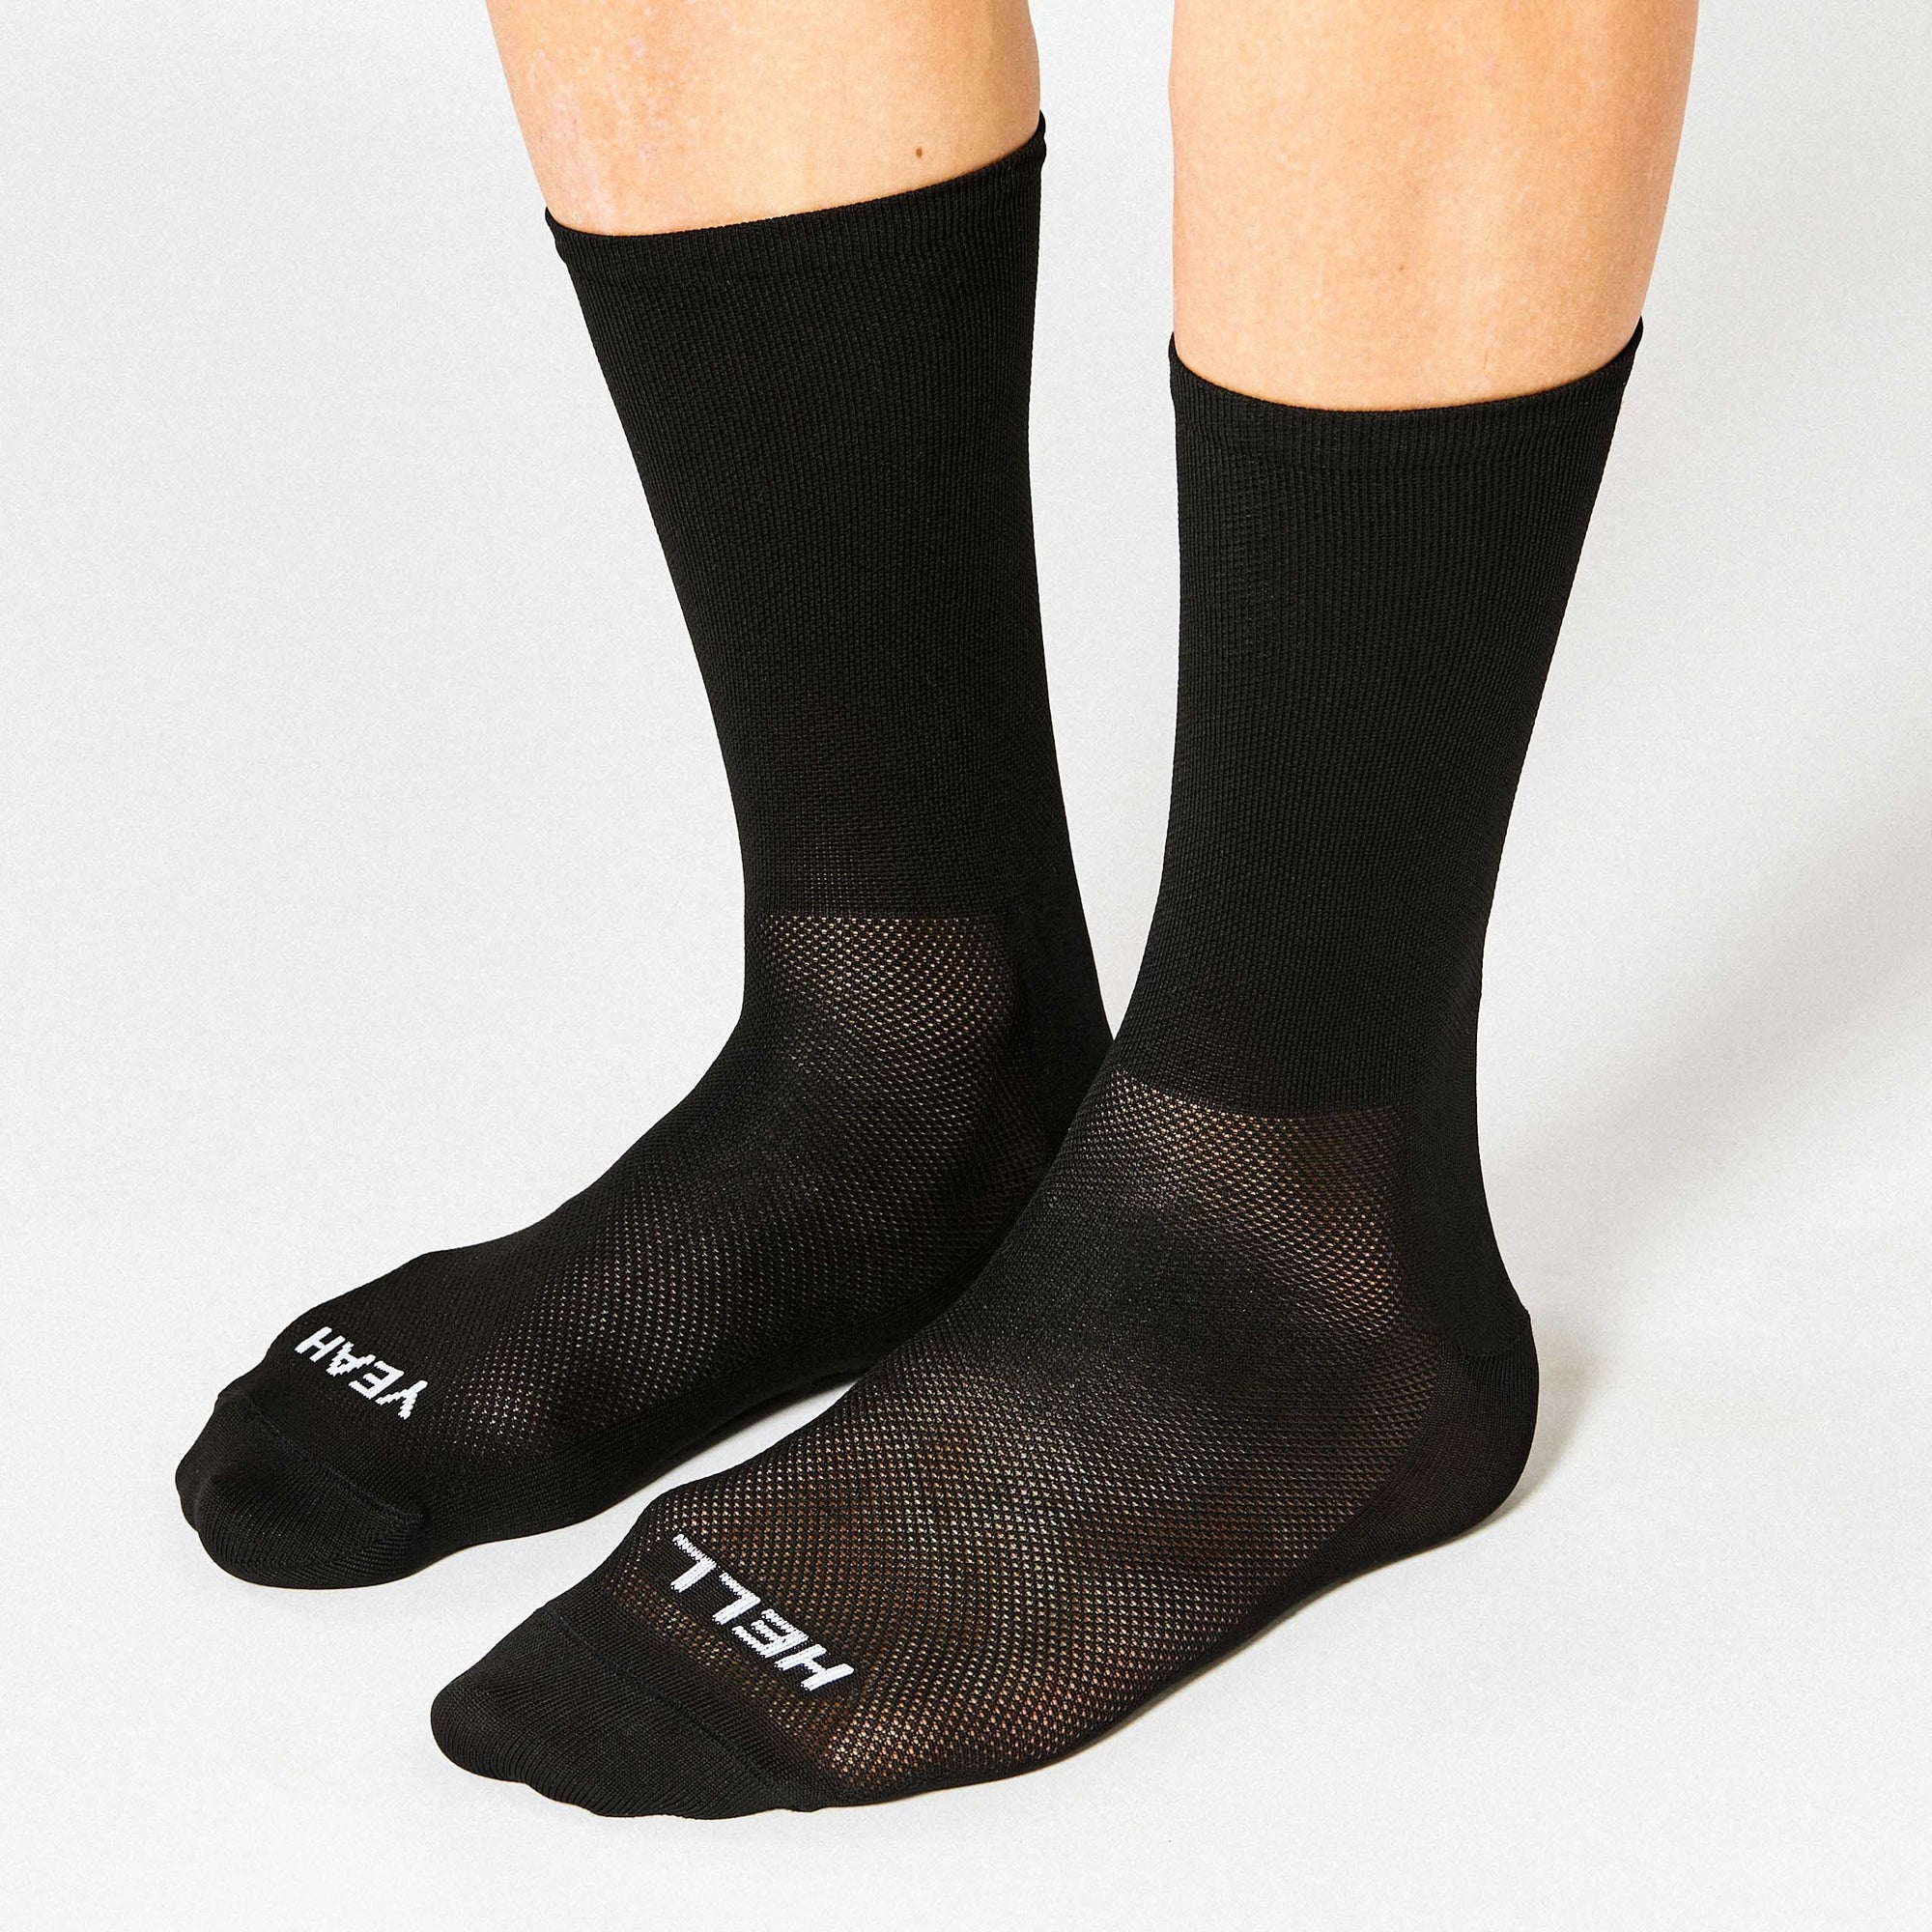 Chausettes Hell Yeah 1.0 - Noir